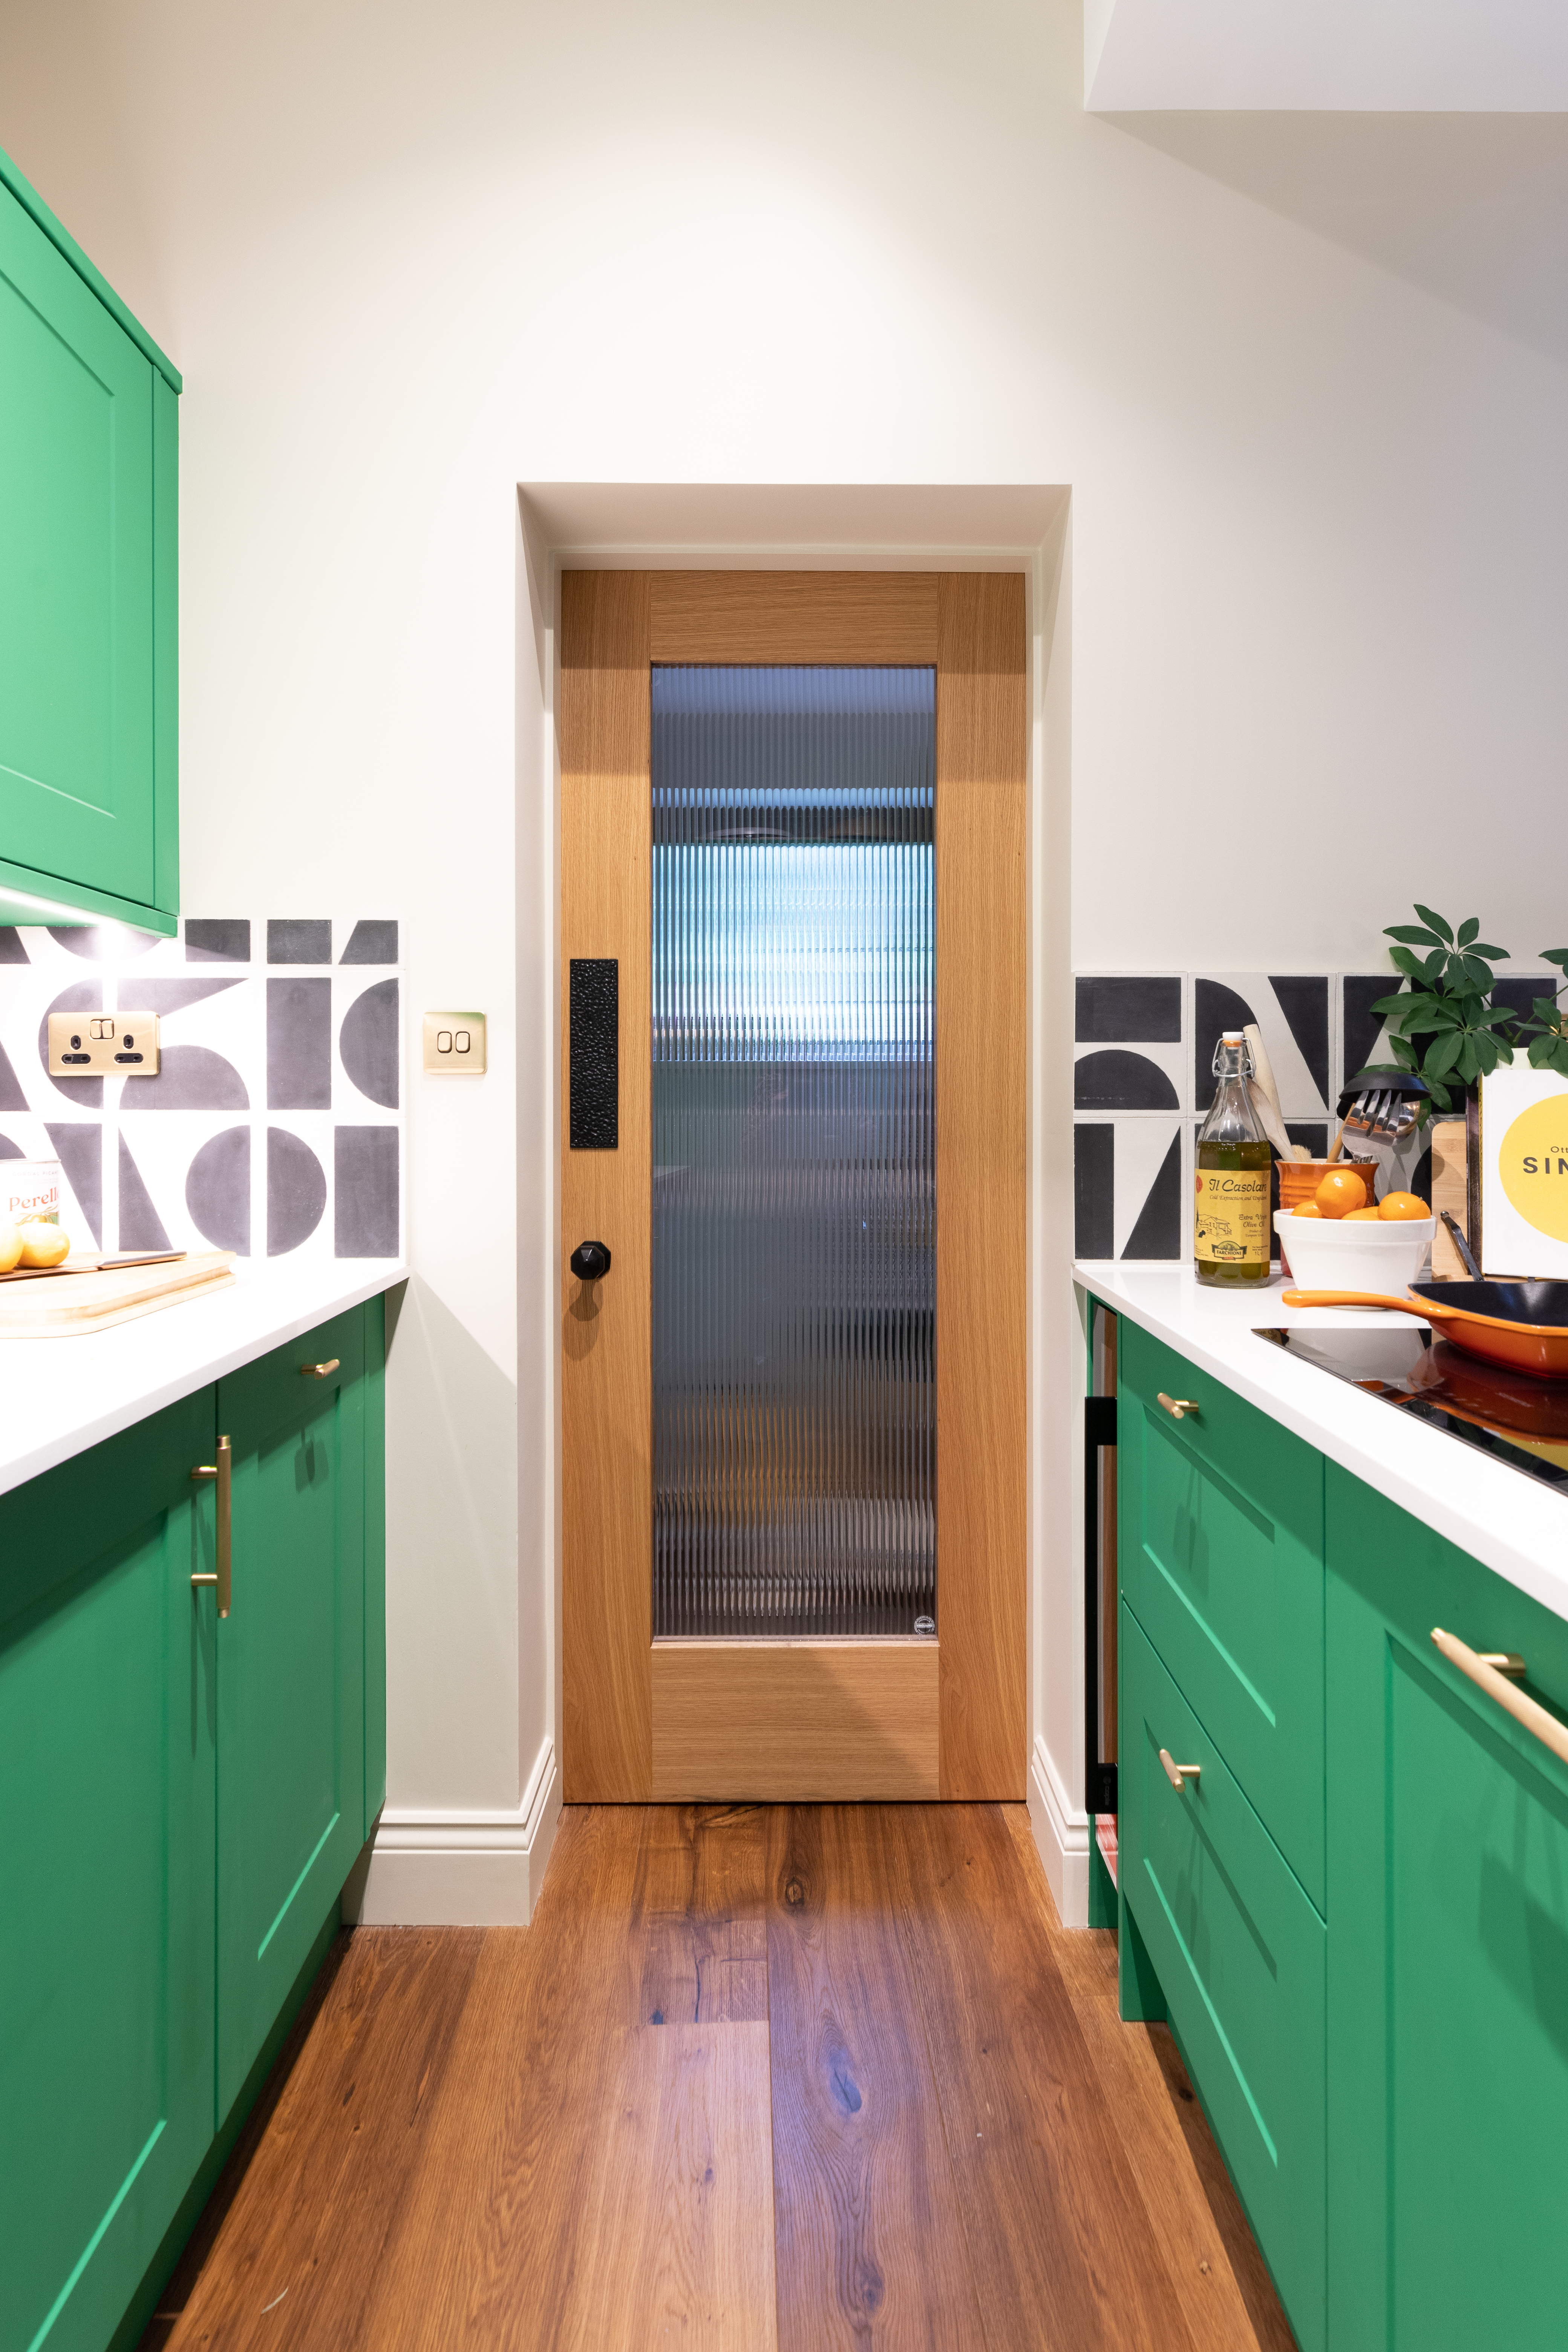 A gorgeous reeded glass door in the kitchen, looking exquisite with the bold green theme, brass ironmongery and feature tile splashback